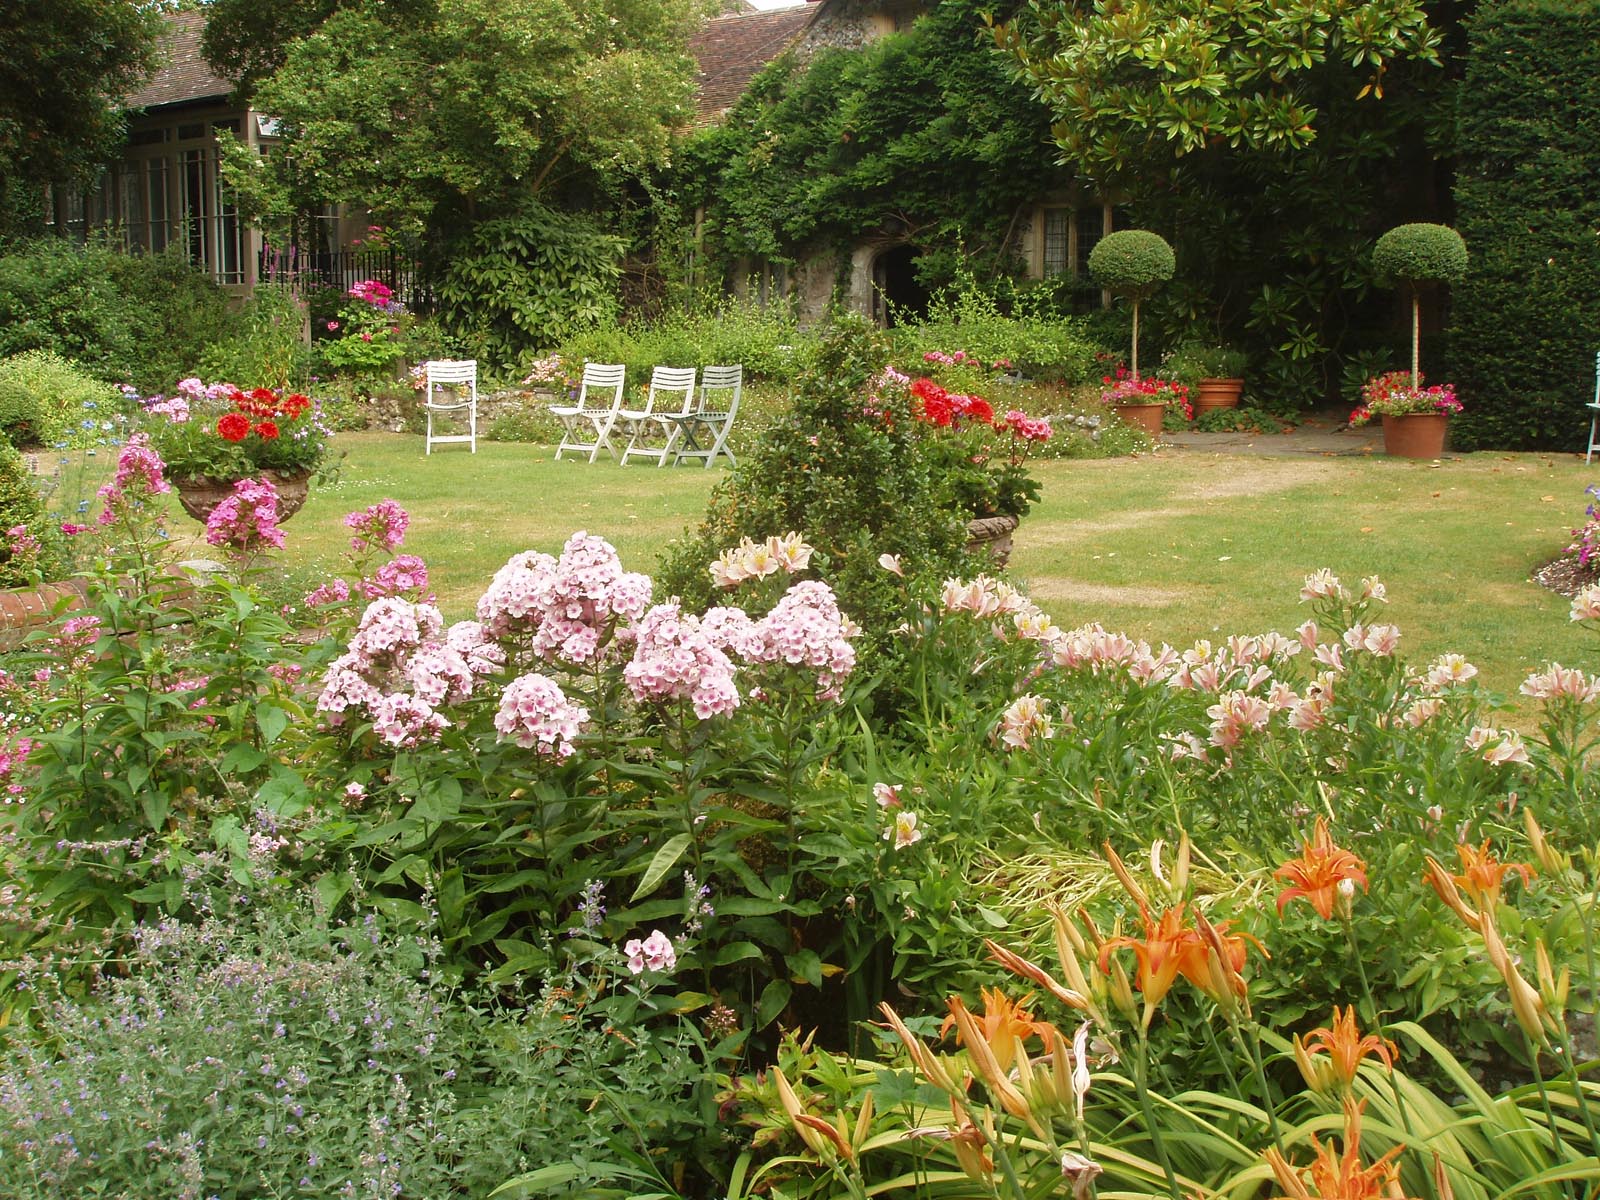 Summer borders and chairs awaiting visitors in the South Garden